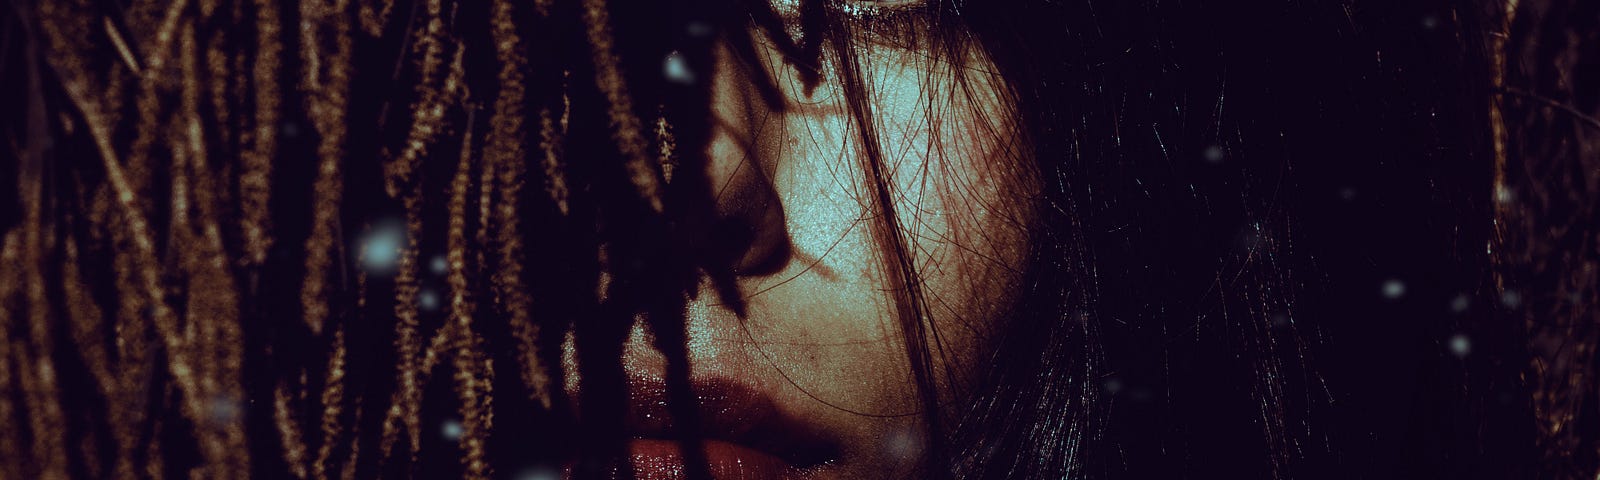 A woman with dreadlocks covering her face